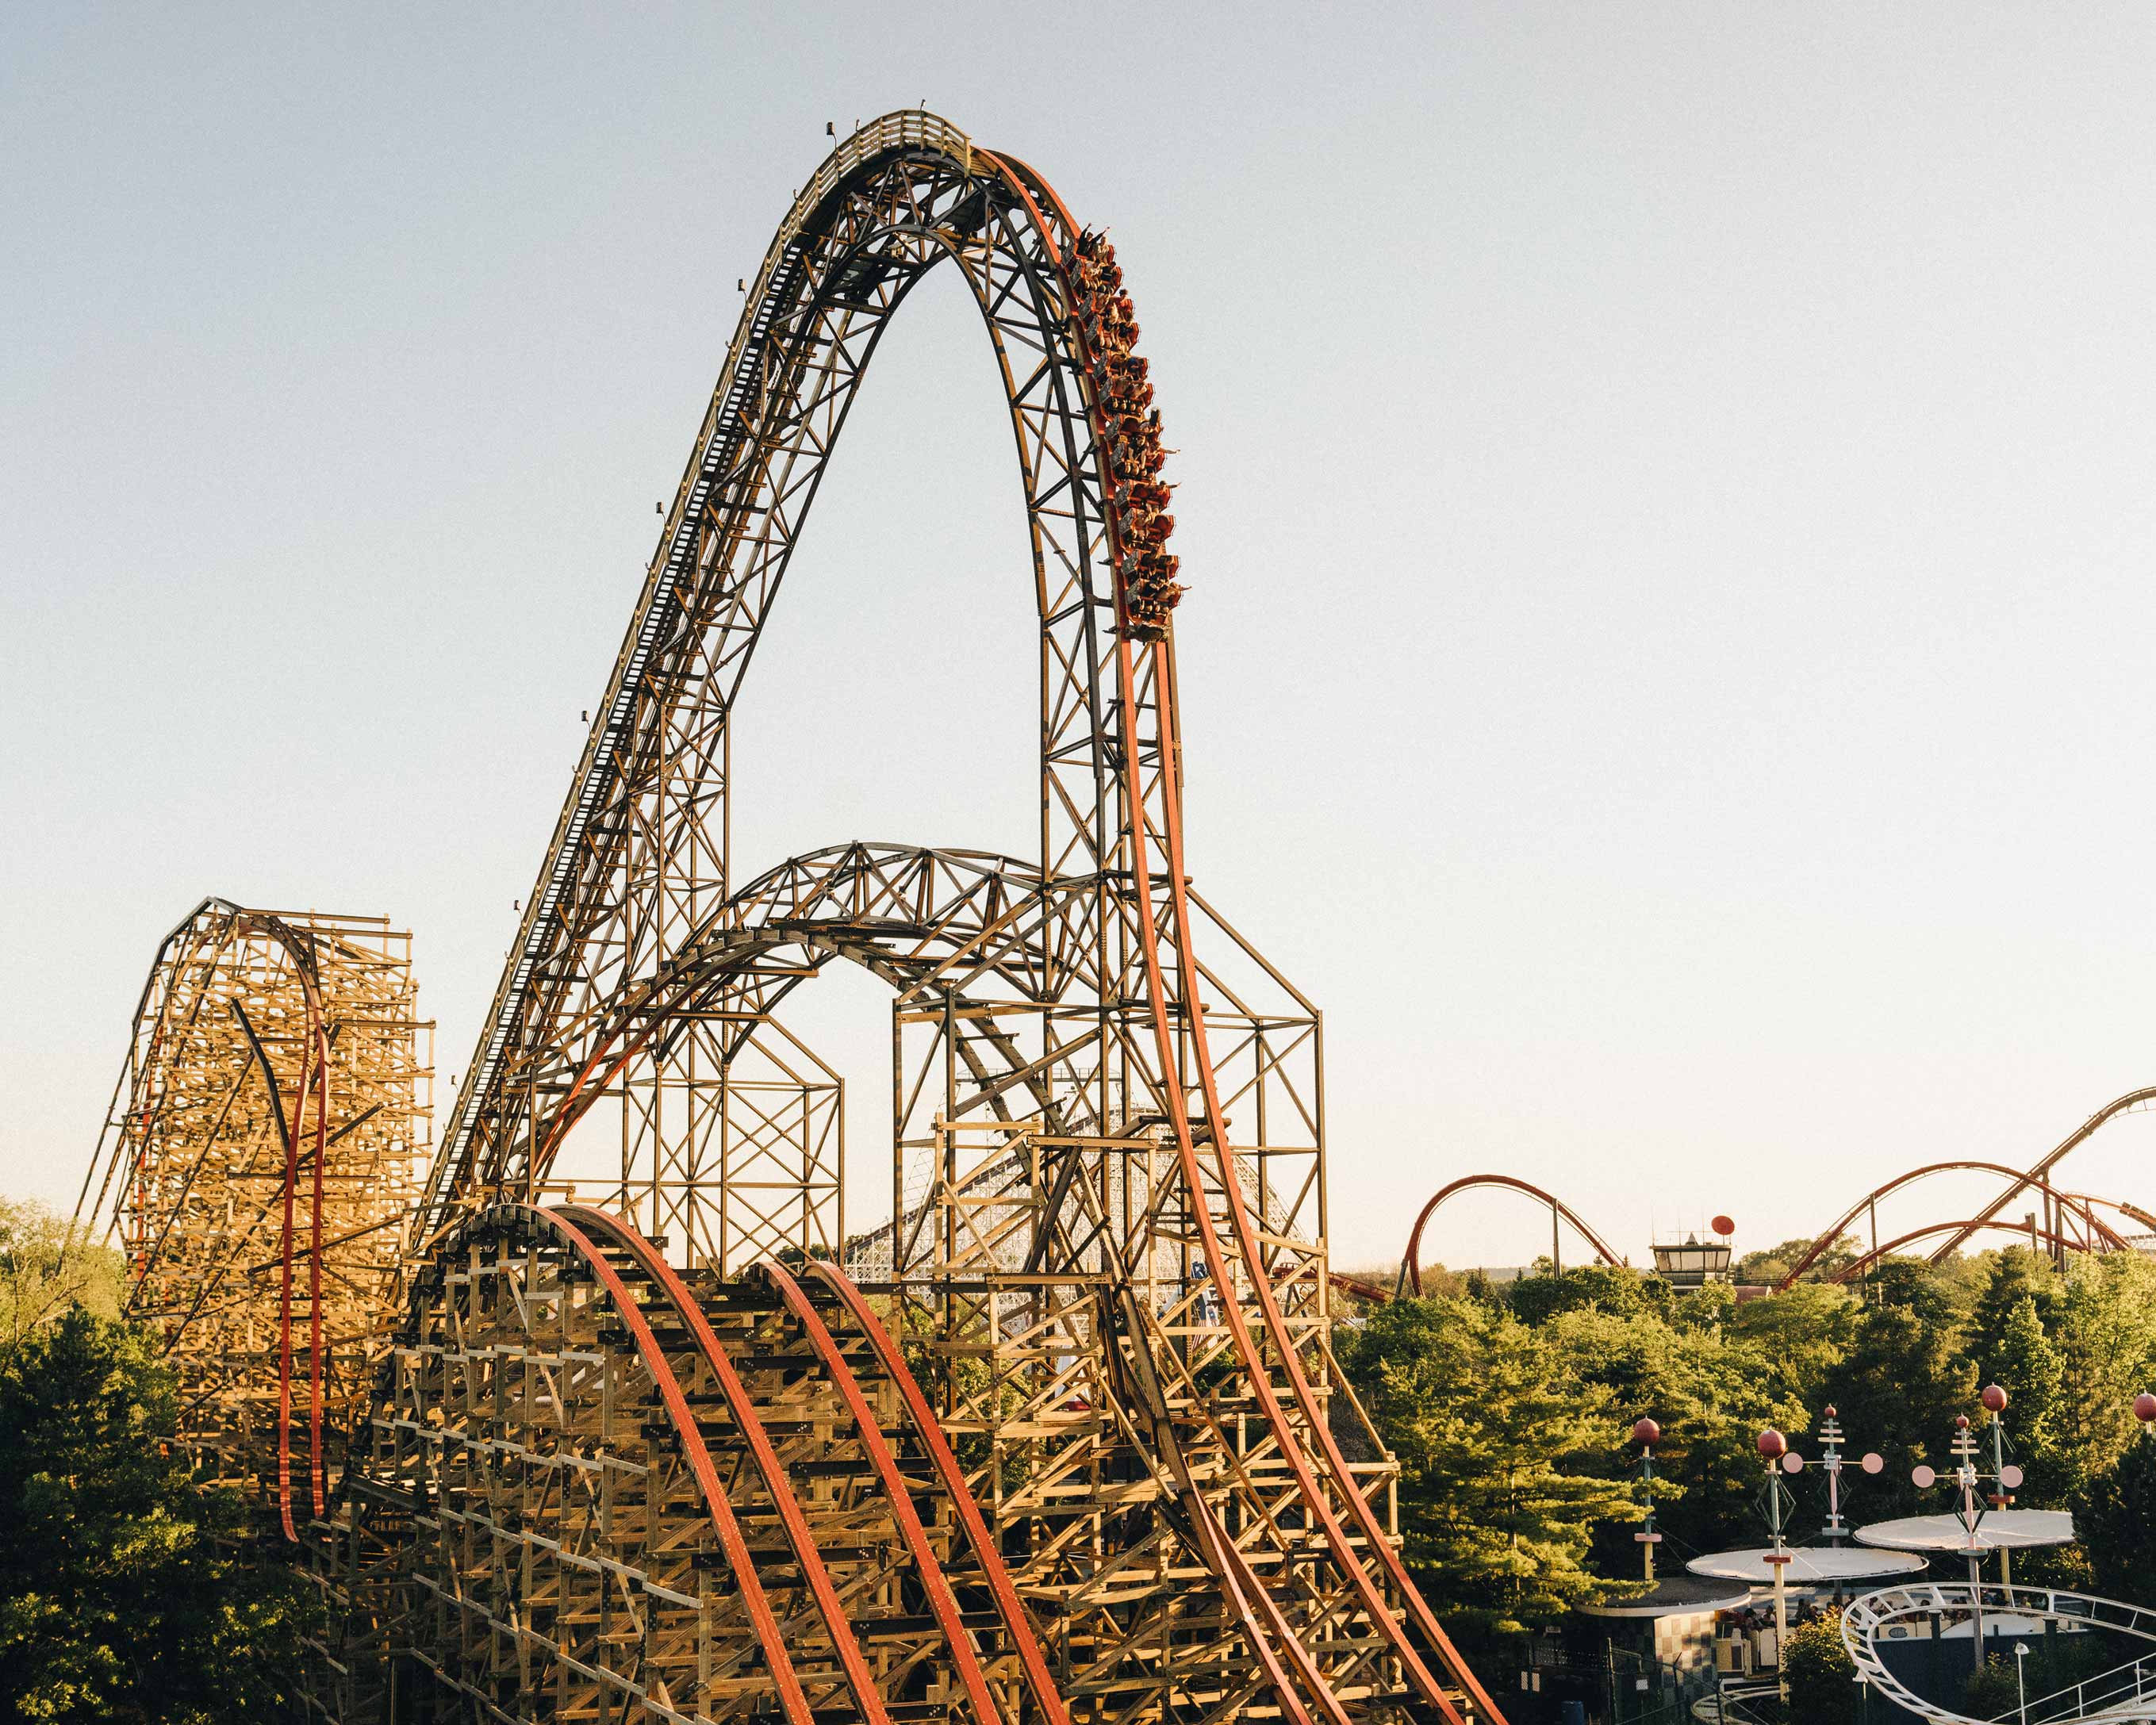 Goliath, at Six Flags Great America in Gurnee, Ill., shattered three world records when it opened in June (Ryan Lowry for TIME)